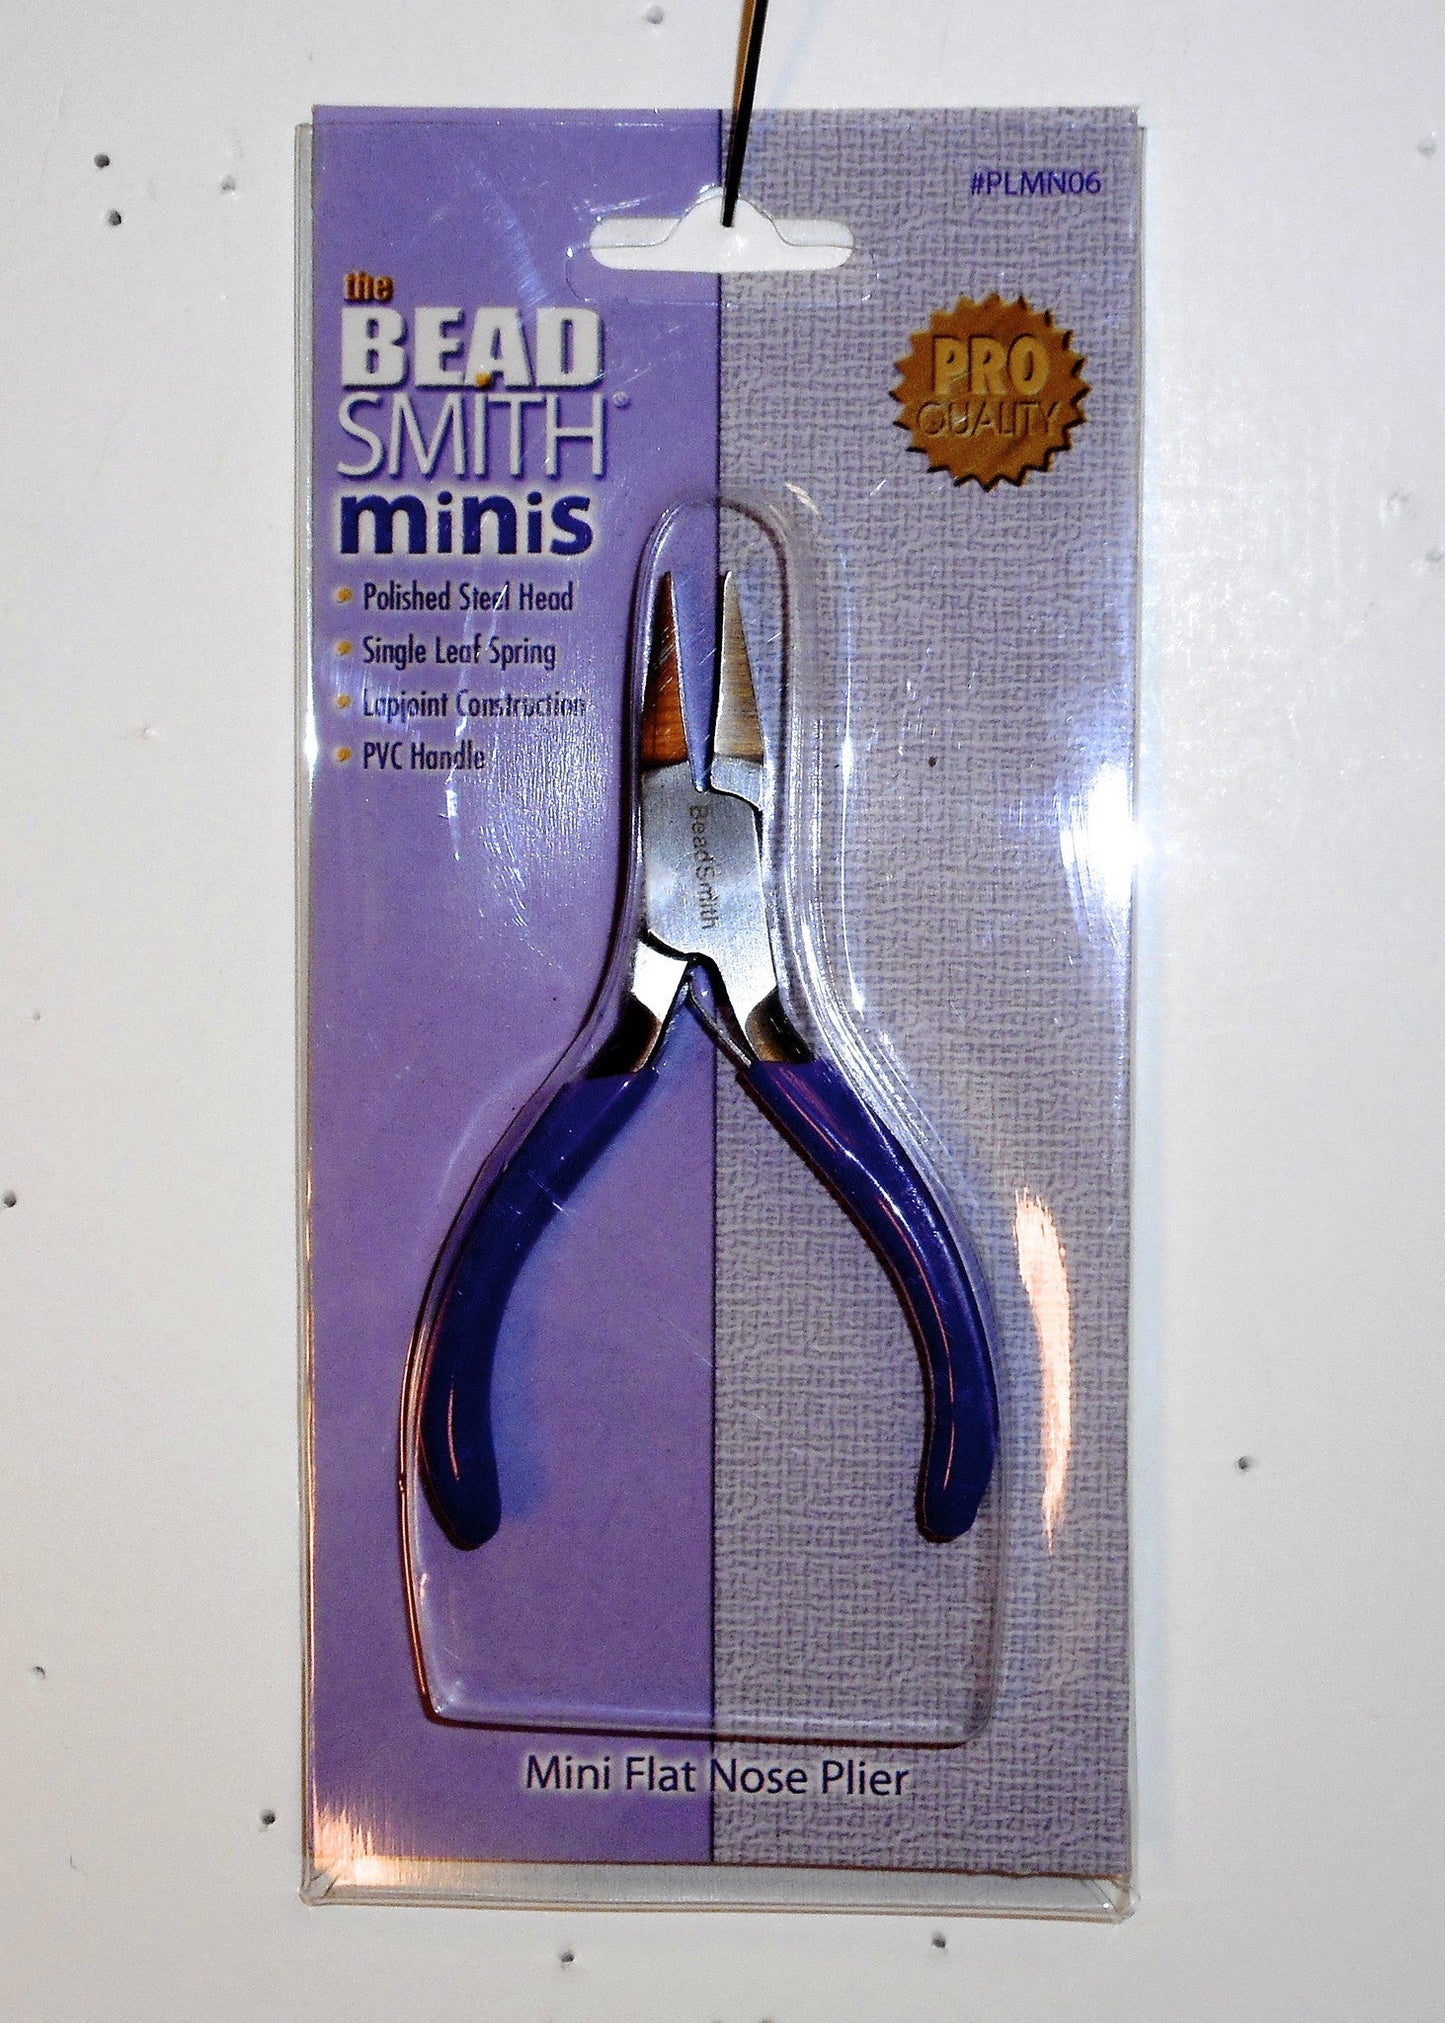 Mini flat nose pliers - The Flying Needles